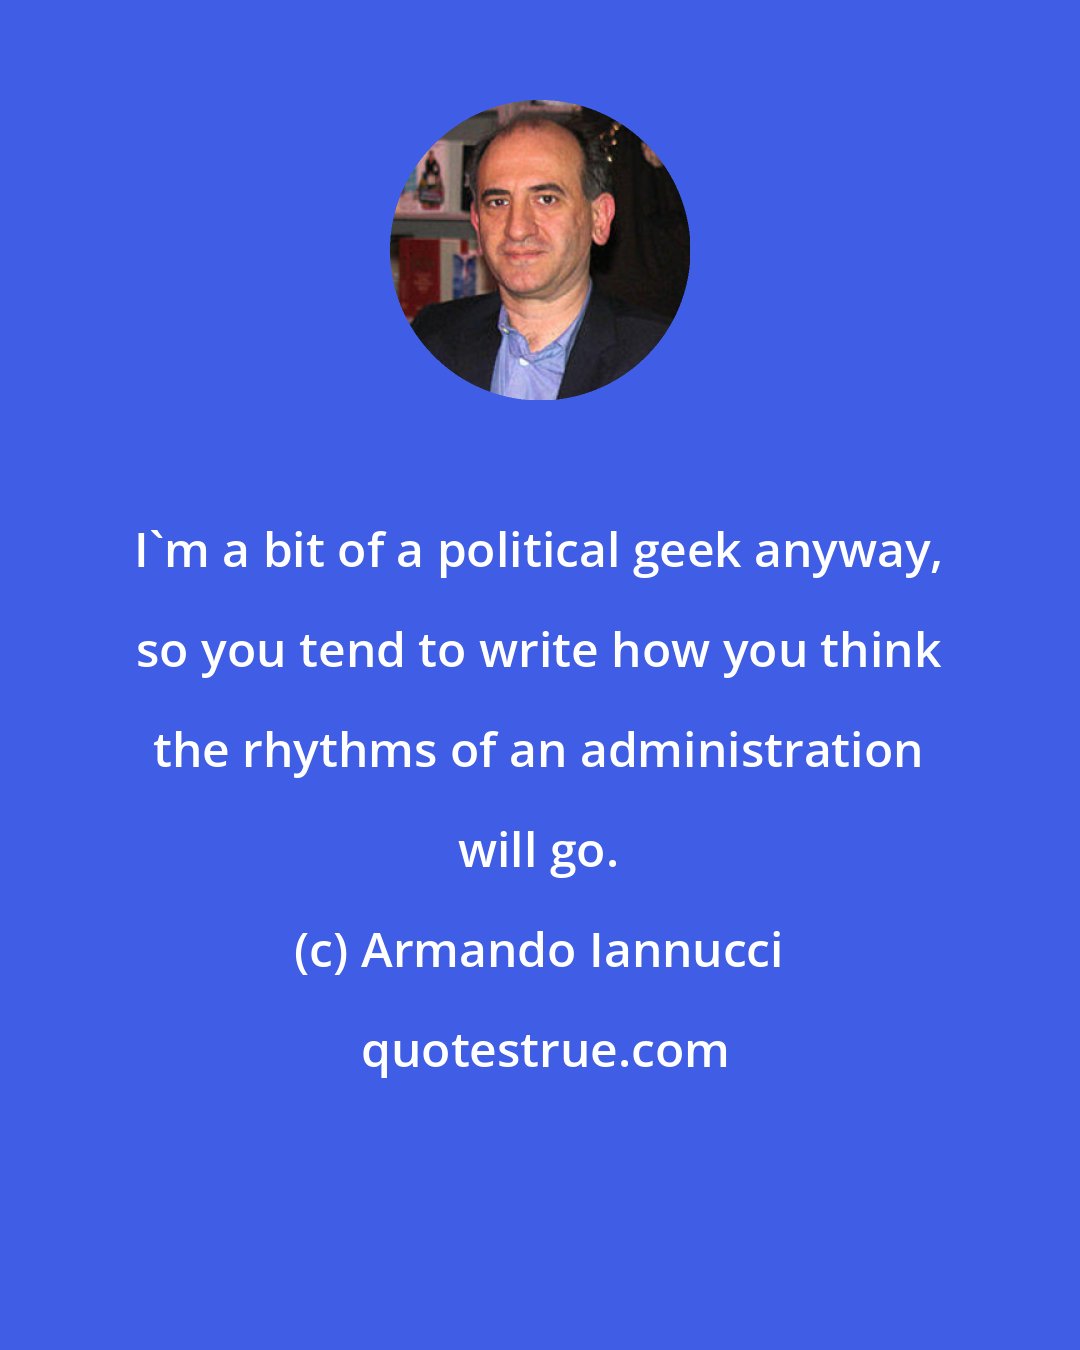 Armando Iannucci: I'm a bit of a political geek anyway, so you tend to write how you think the rhythms of an administration will go.